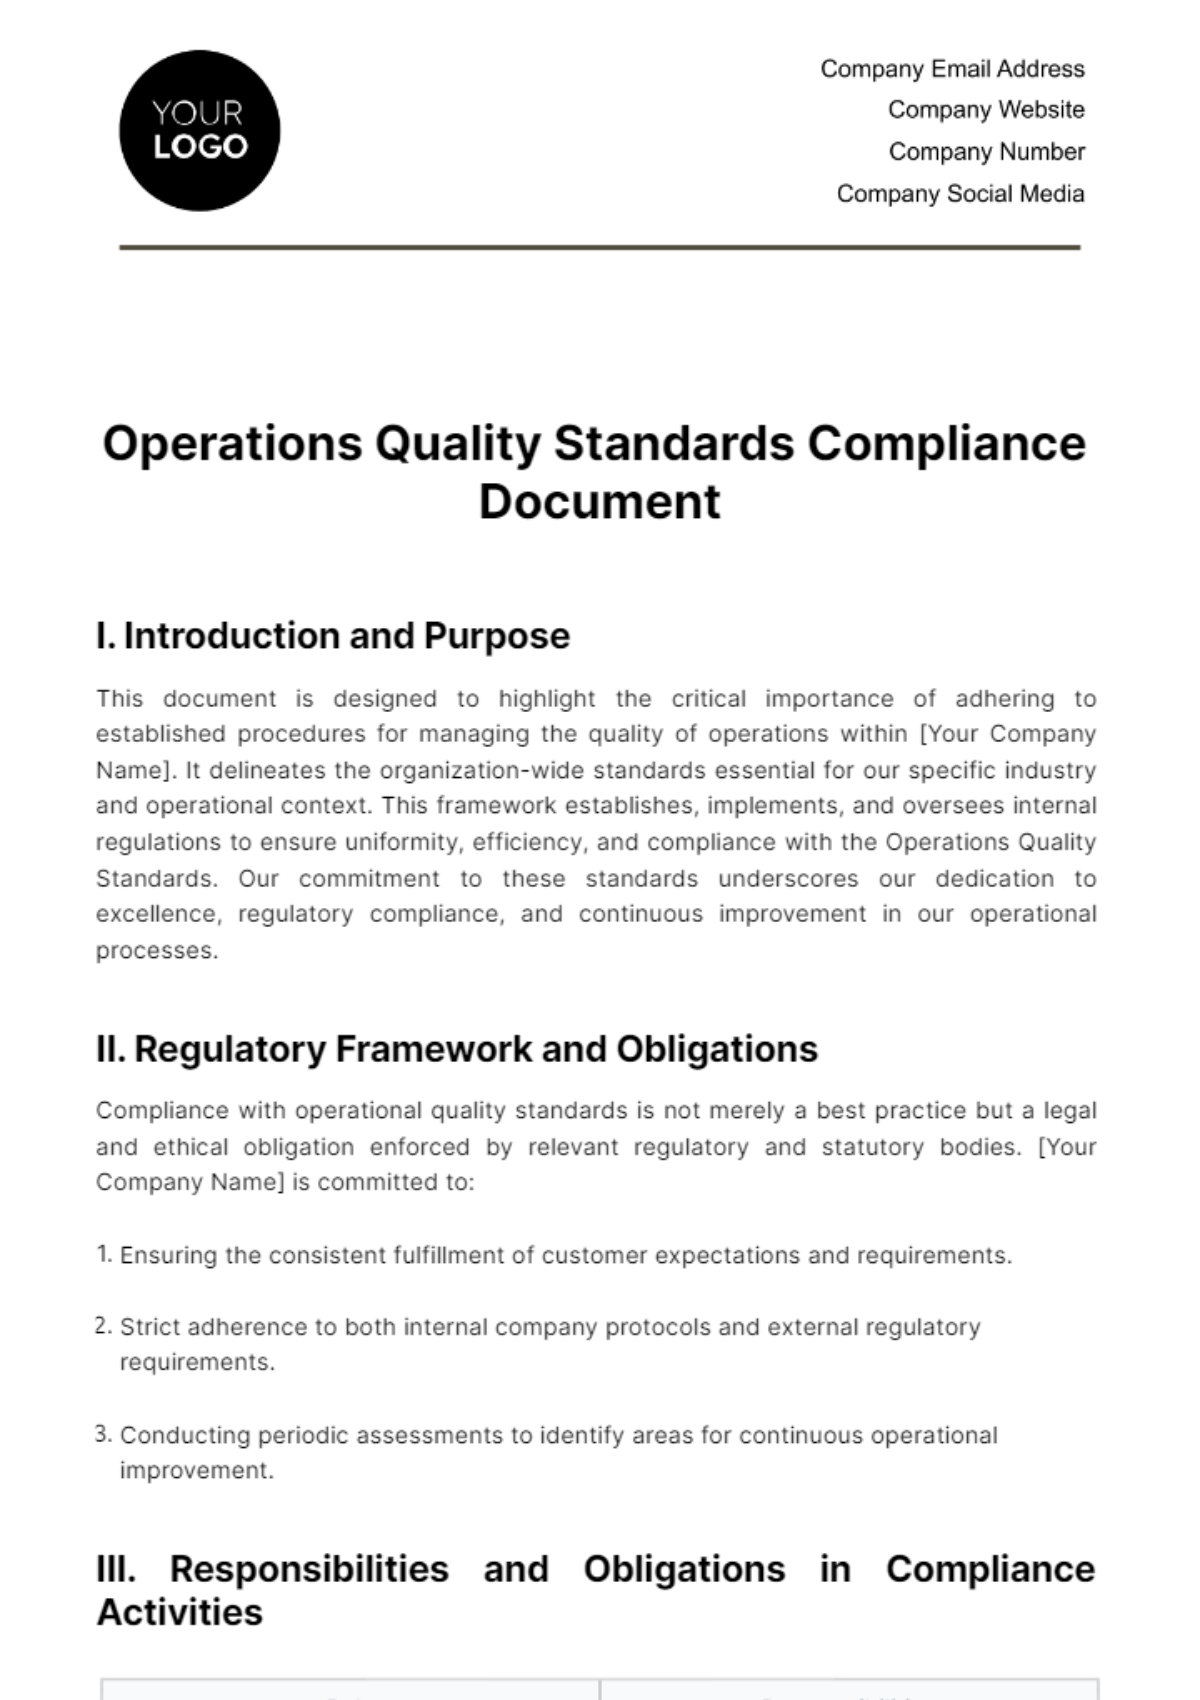 Operations Quality Standards Compliance Document Template